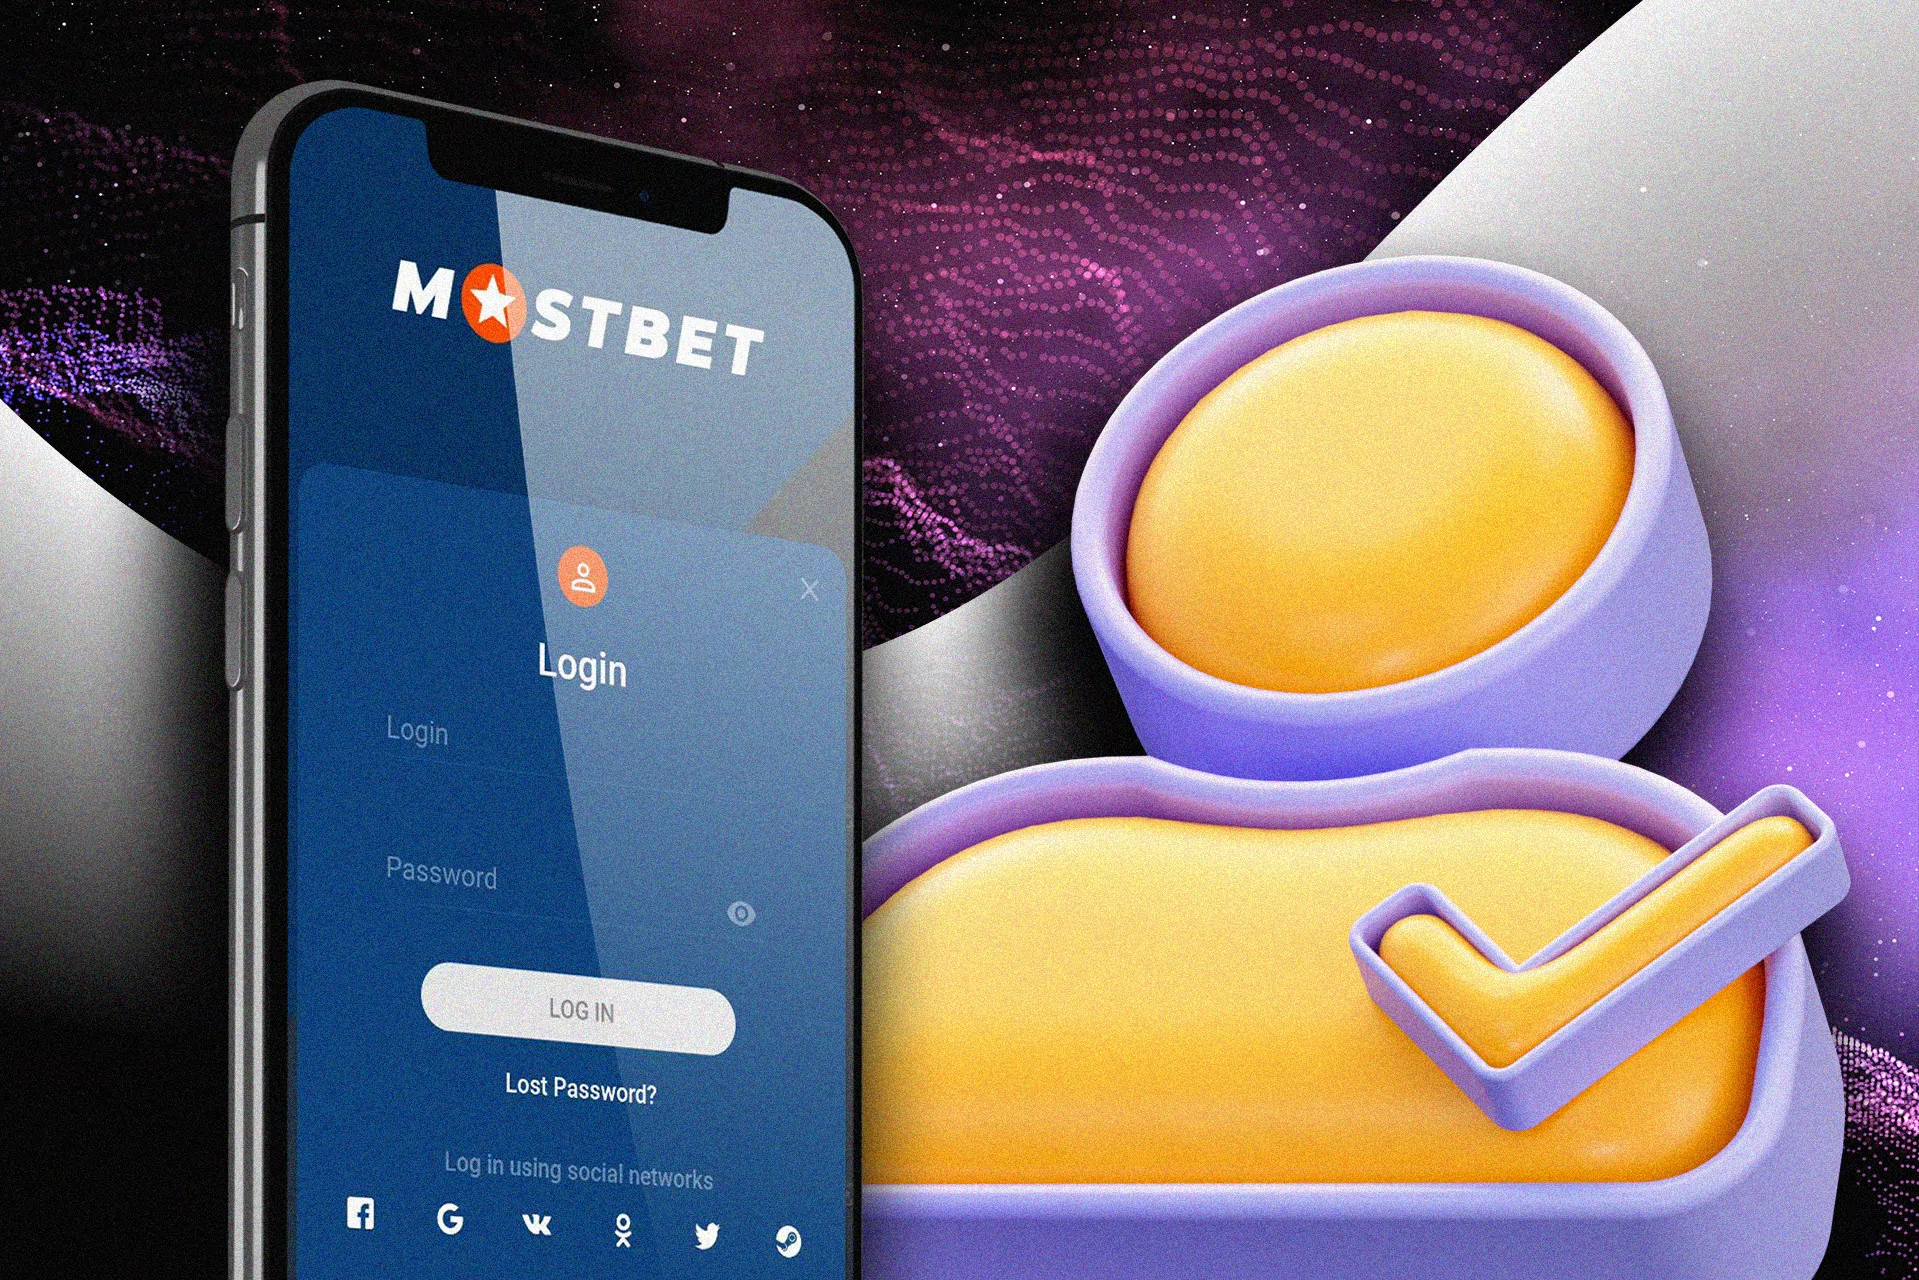 Enter your login and a password to log in to Mostbet app.